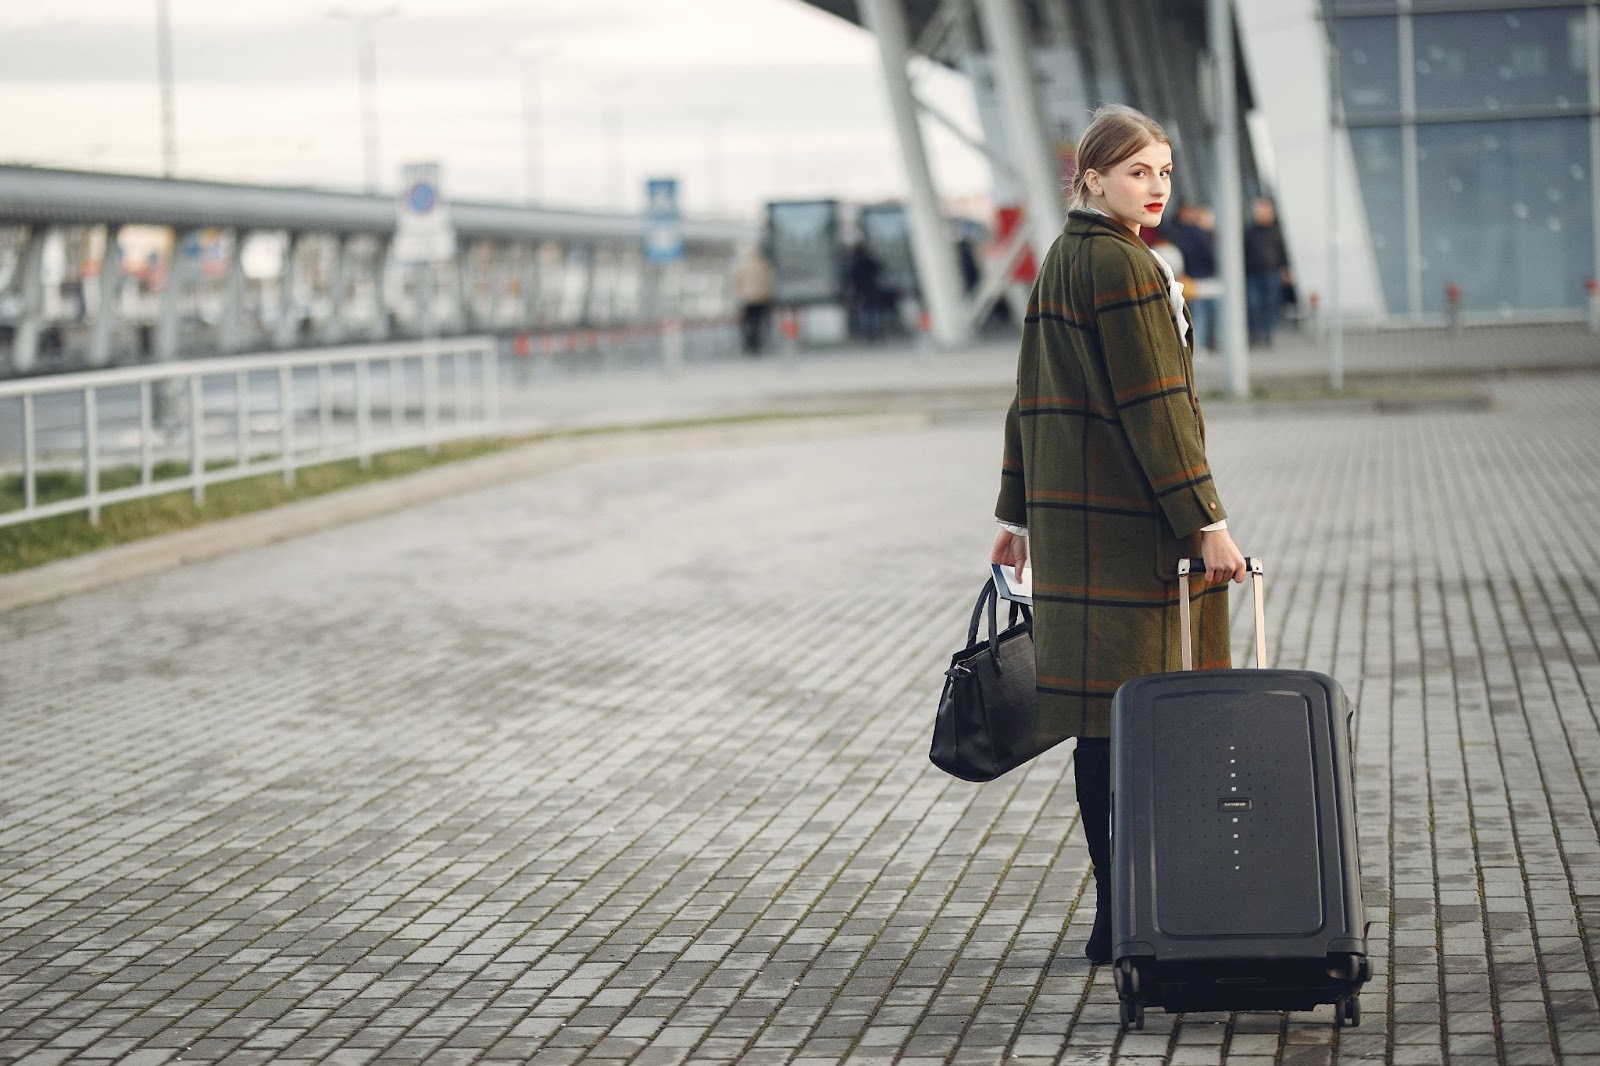 A woman is carrying her luggage in the airport.
Airport Transfer service
Airport Assistance services